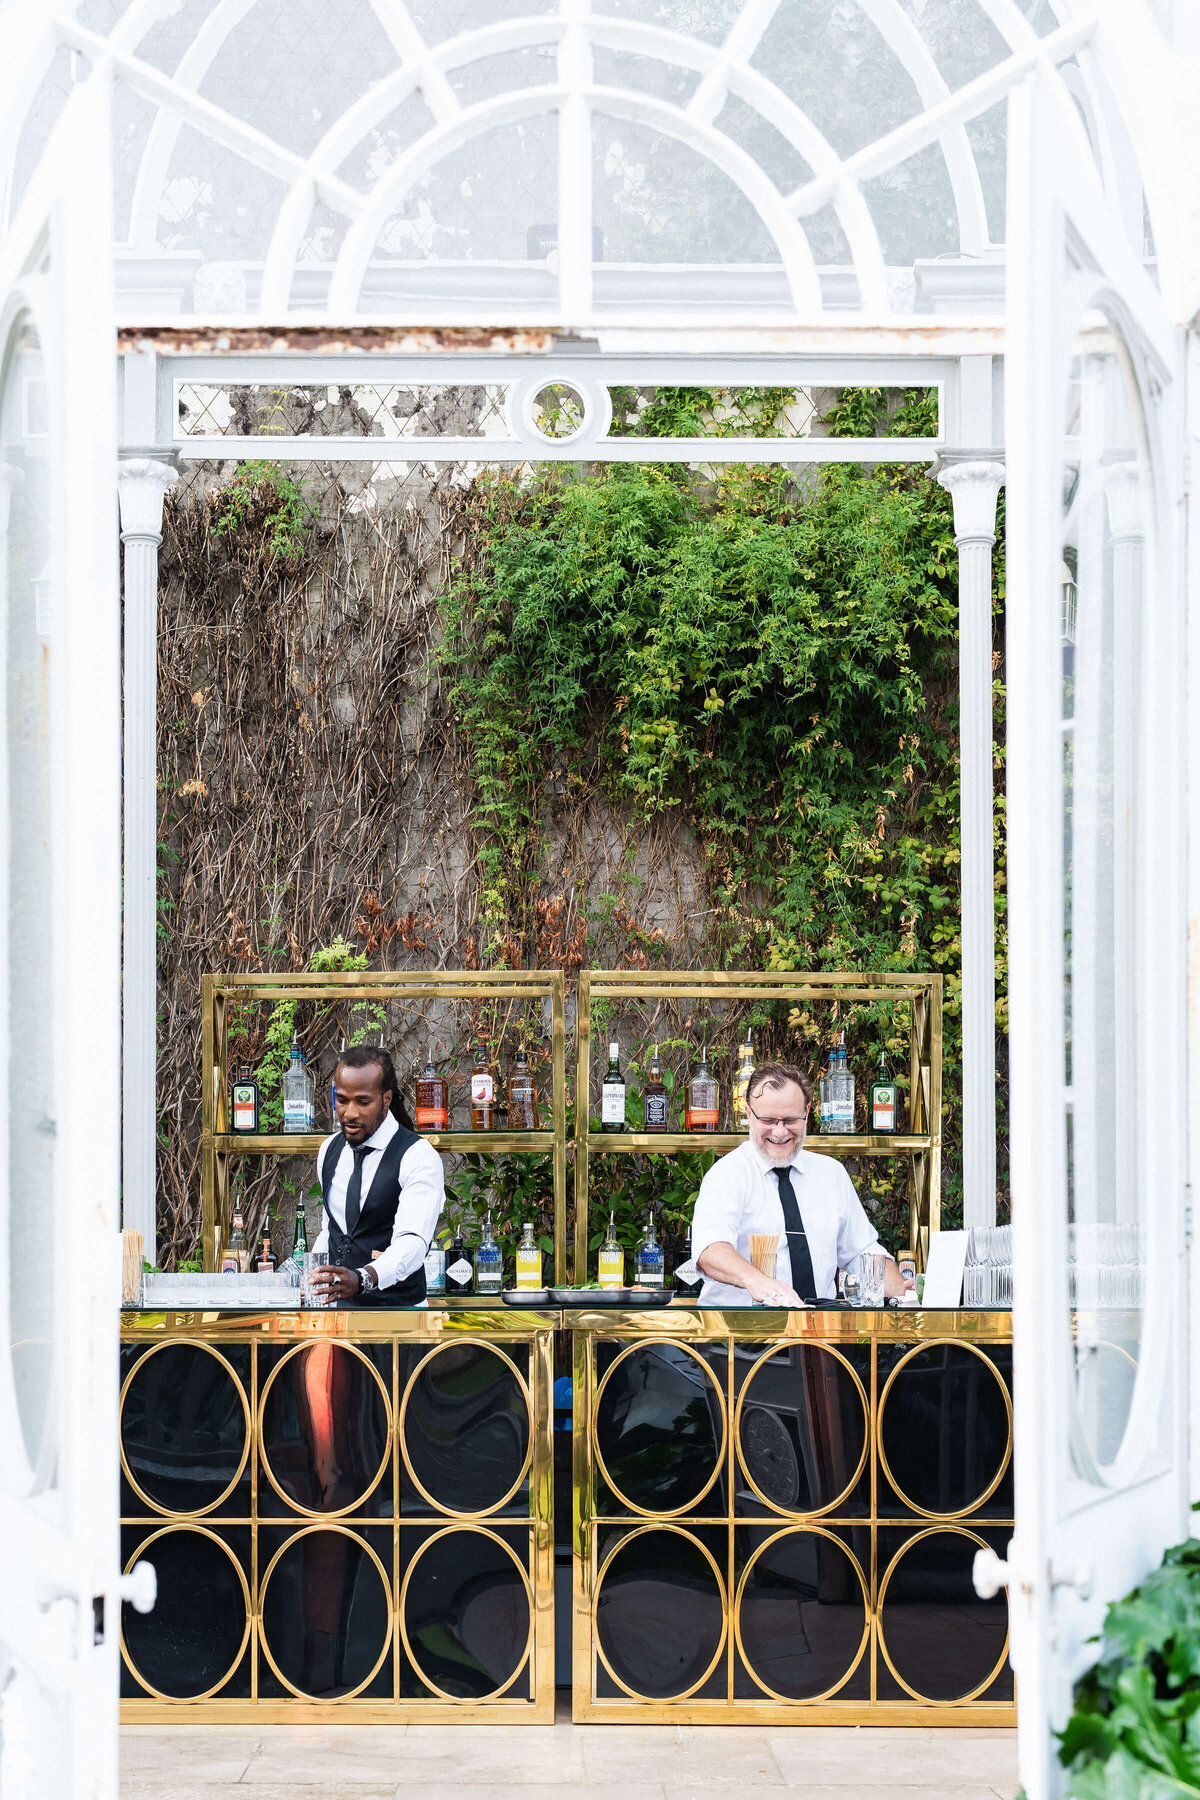 bartenders at a black and gold bar inside avington park’s glasshouse orangery for a luxury 50th birthday party event